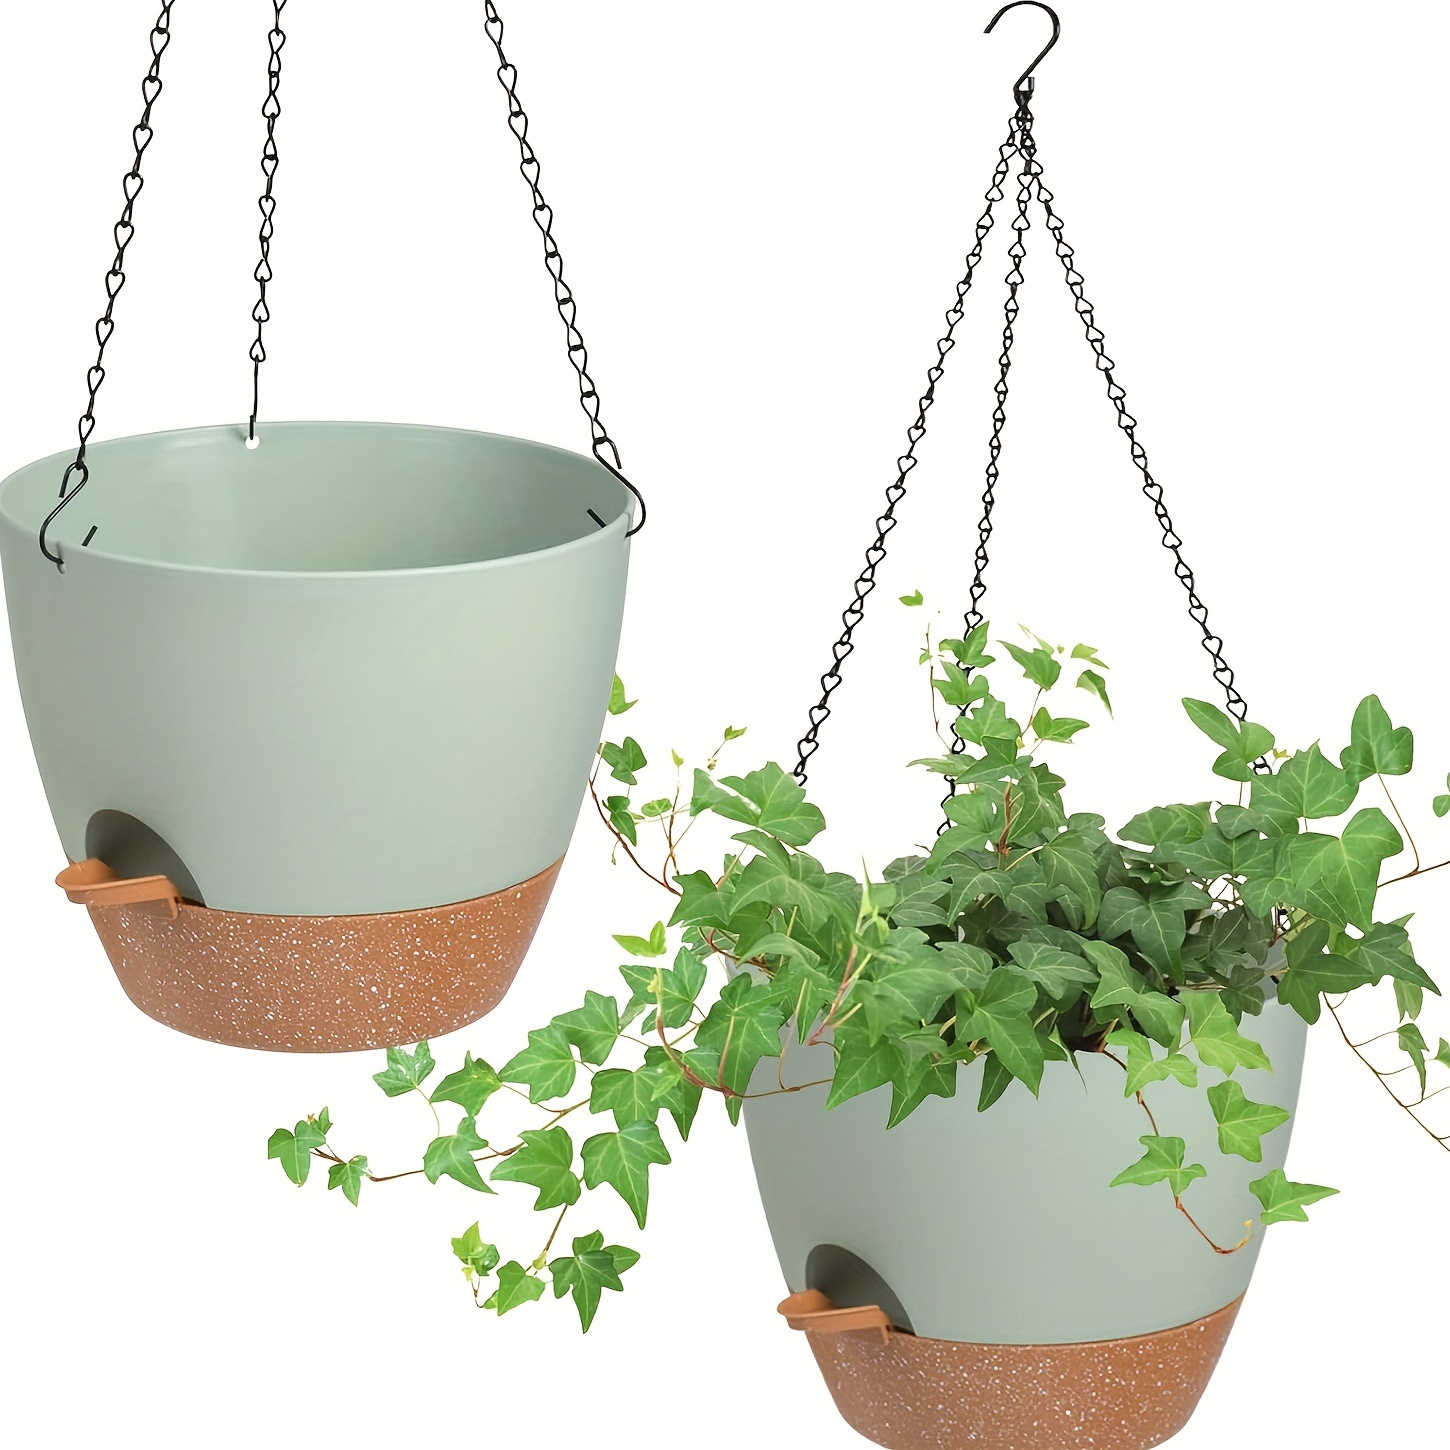 

2 Packs, Self-watering Hanging Planters, 8-inch Classic Plastic Flower Pots With Drainage Tray Chain For Indoor Outdoor Use, Green Copper